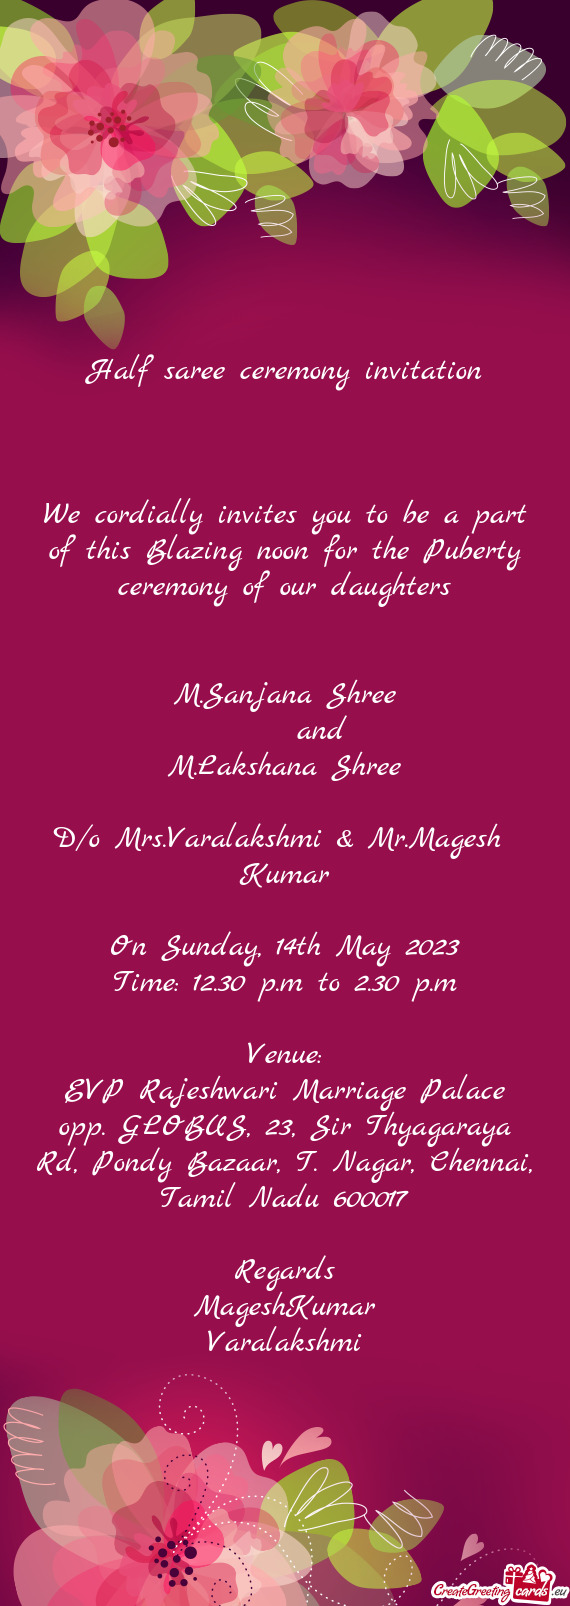 We cordially invites you to be a part of this Blazing noon for the Puberty ceremony of our daughters